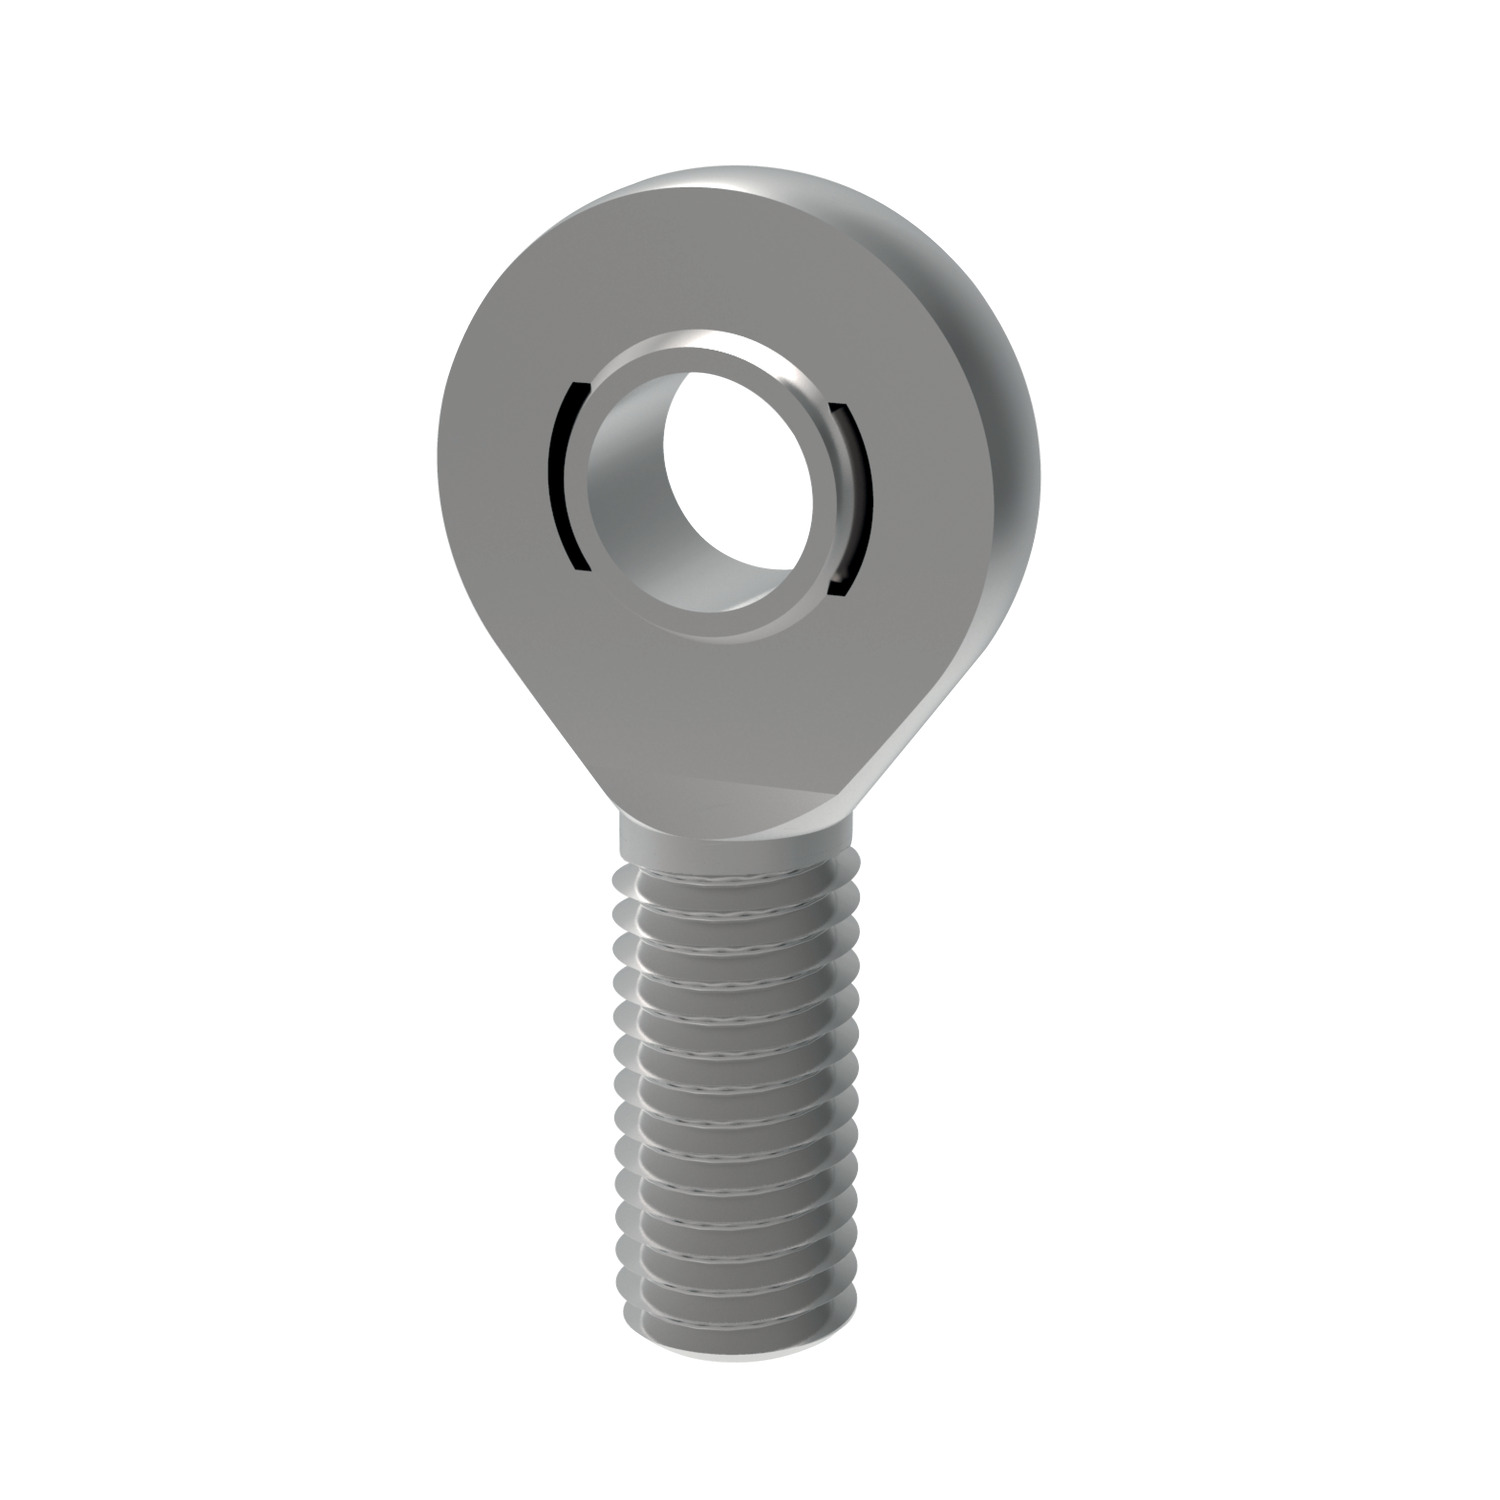 Heavy-Duty Rod Ends - Male Heavy duty male rod end. E series rod end with a thinner profile width.